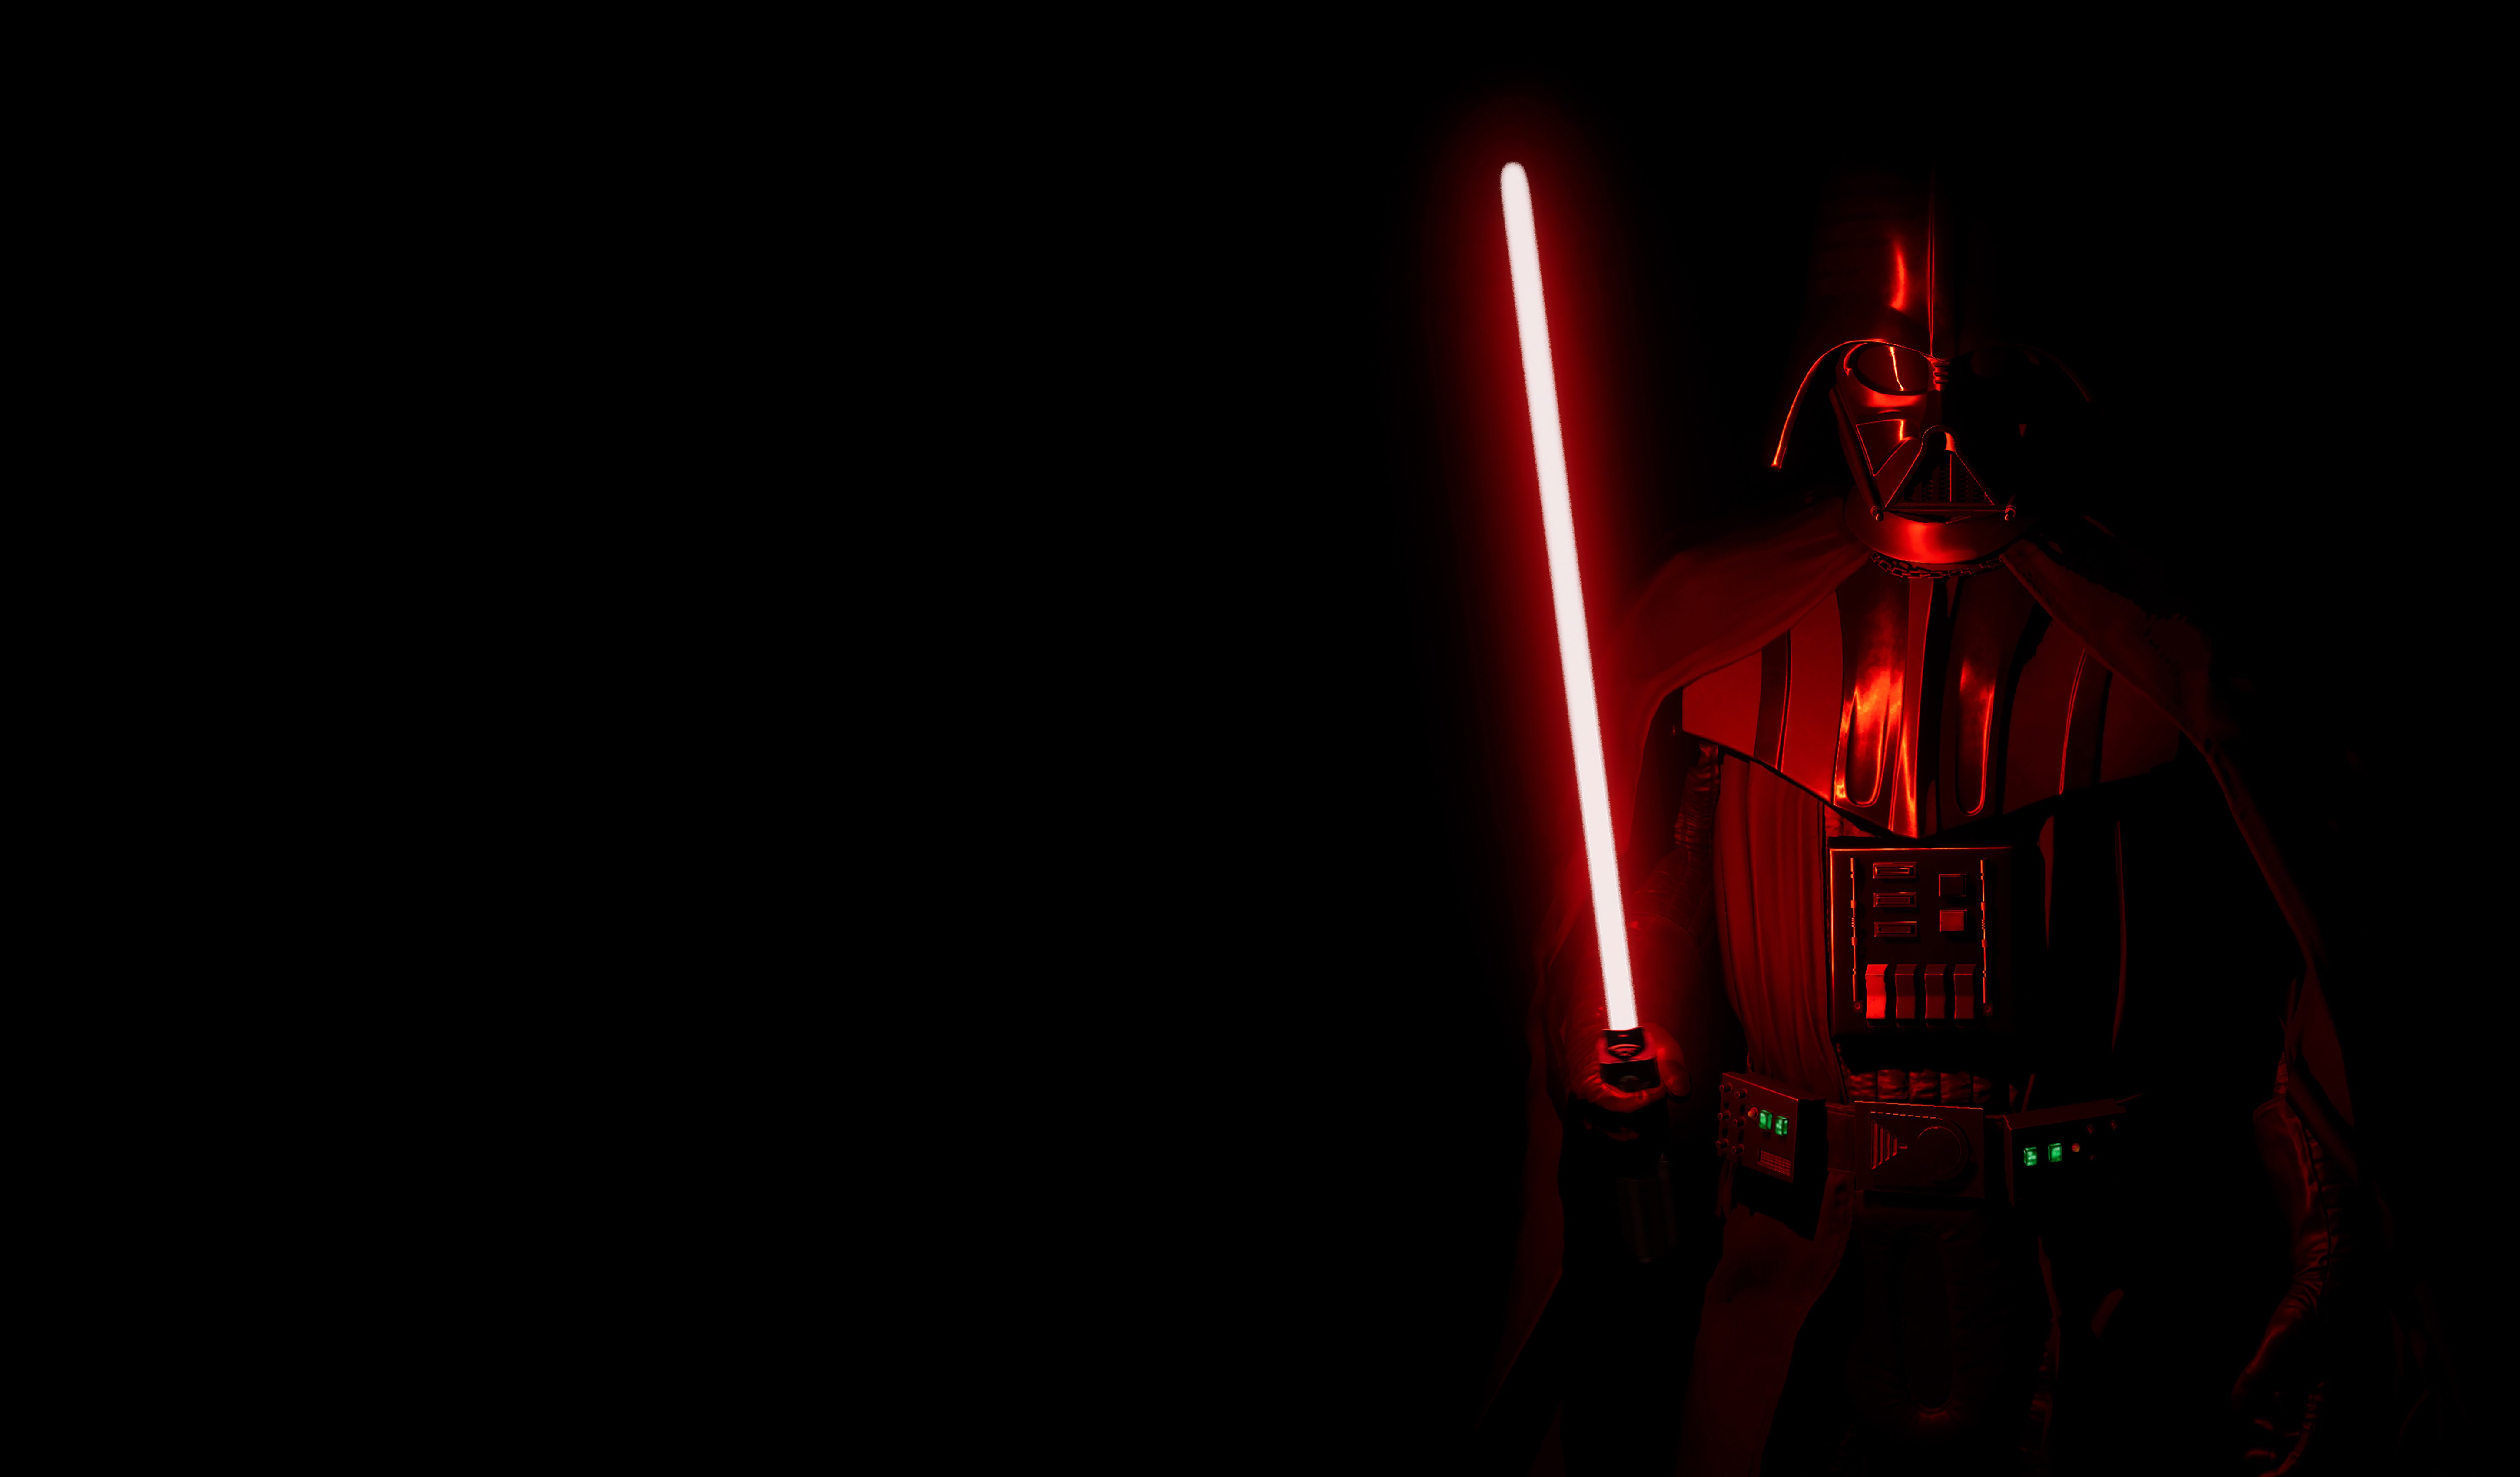 Red Darth Vader Minimalist Wallpaper Every Day New Pictures